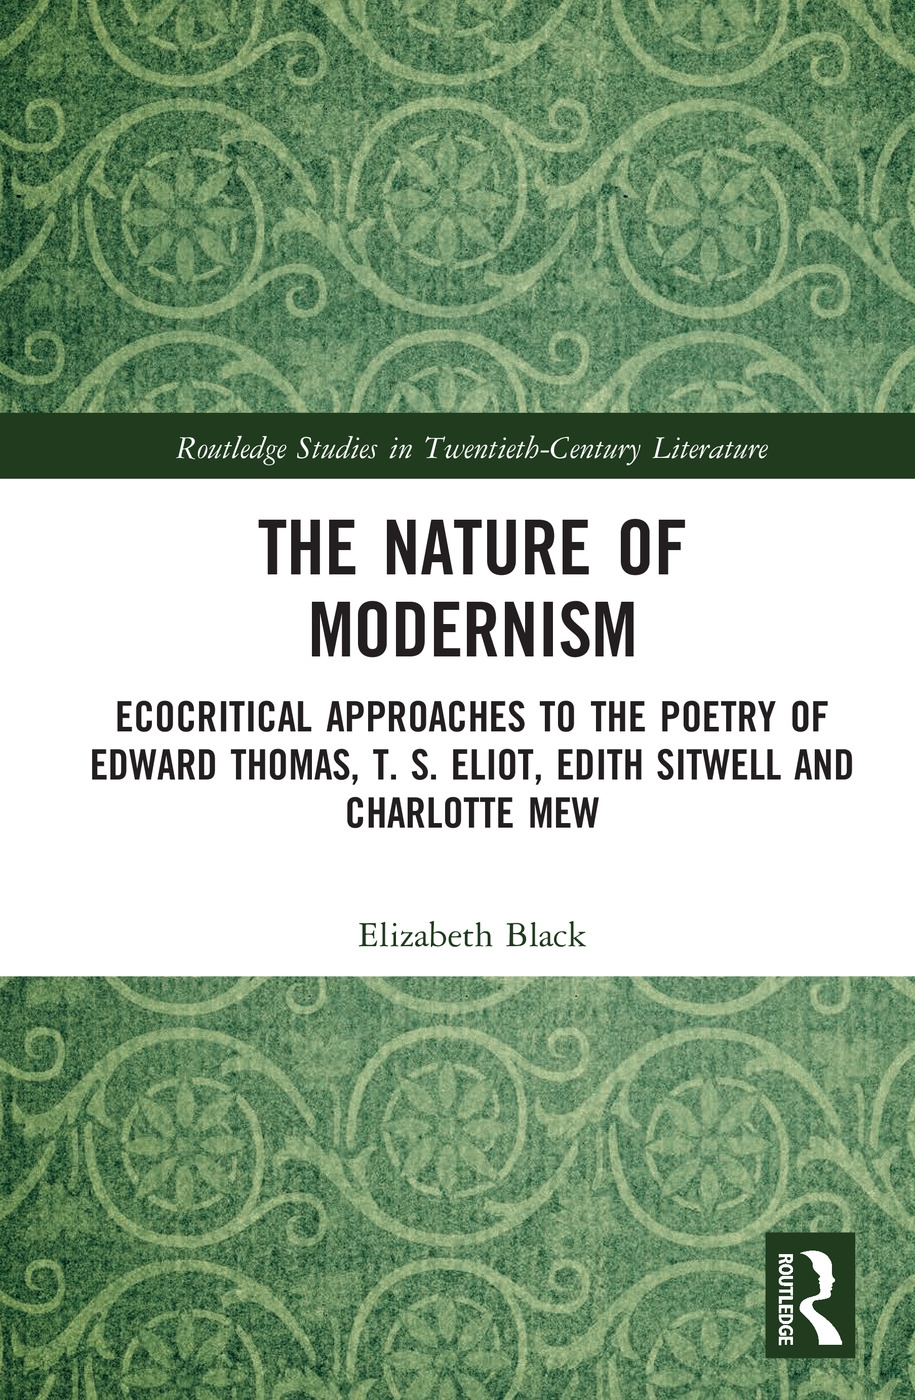 The Nature of Modernism: Ecocritical Approaches to the Poetry of Edward Thomas, T. S. Eliot, Edith Sitwell and Charlotte Mew